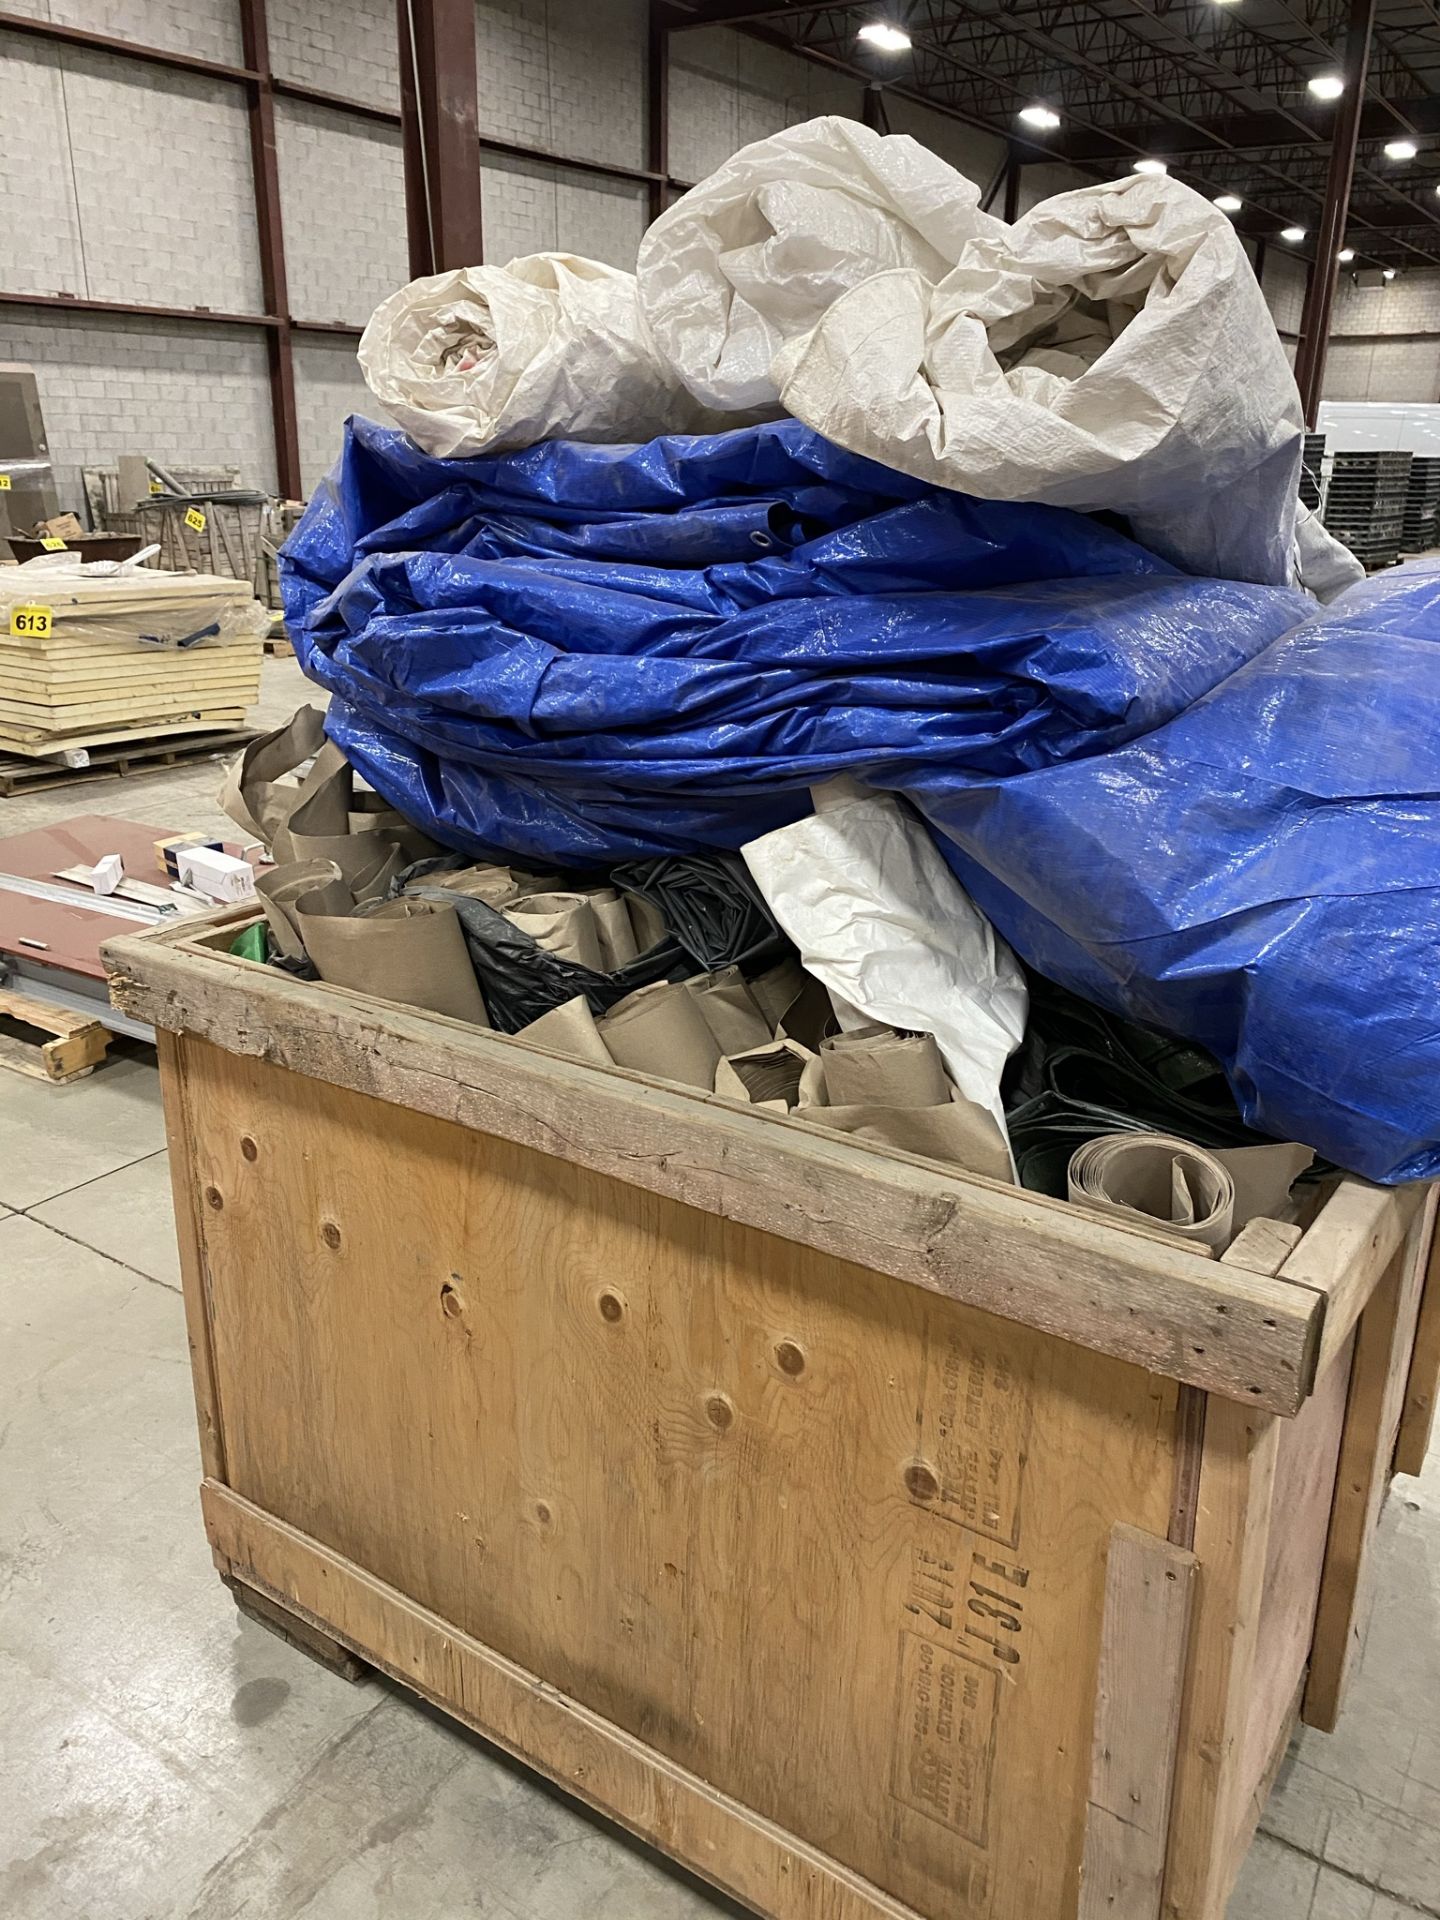 LOT OF (8) LARGE CONSTRUCTION TARPS IN WOODEN TRAVEL TOTES, 4' X 4' - Image 3 of 4